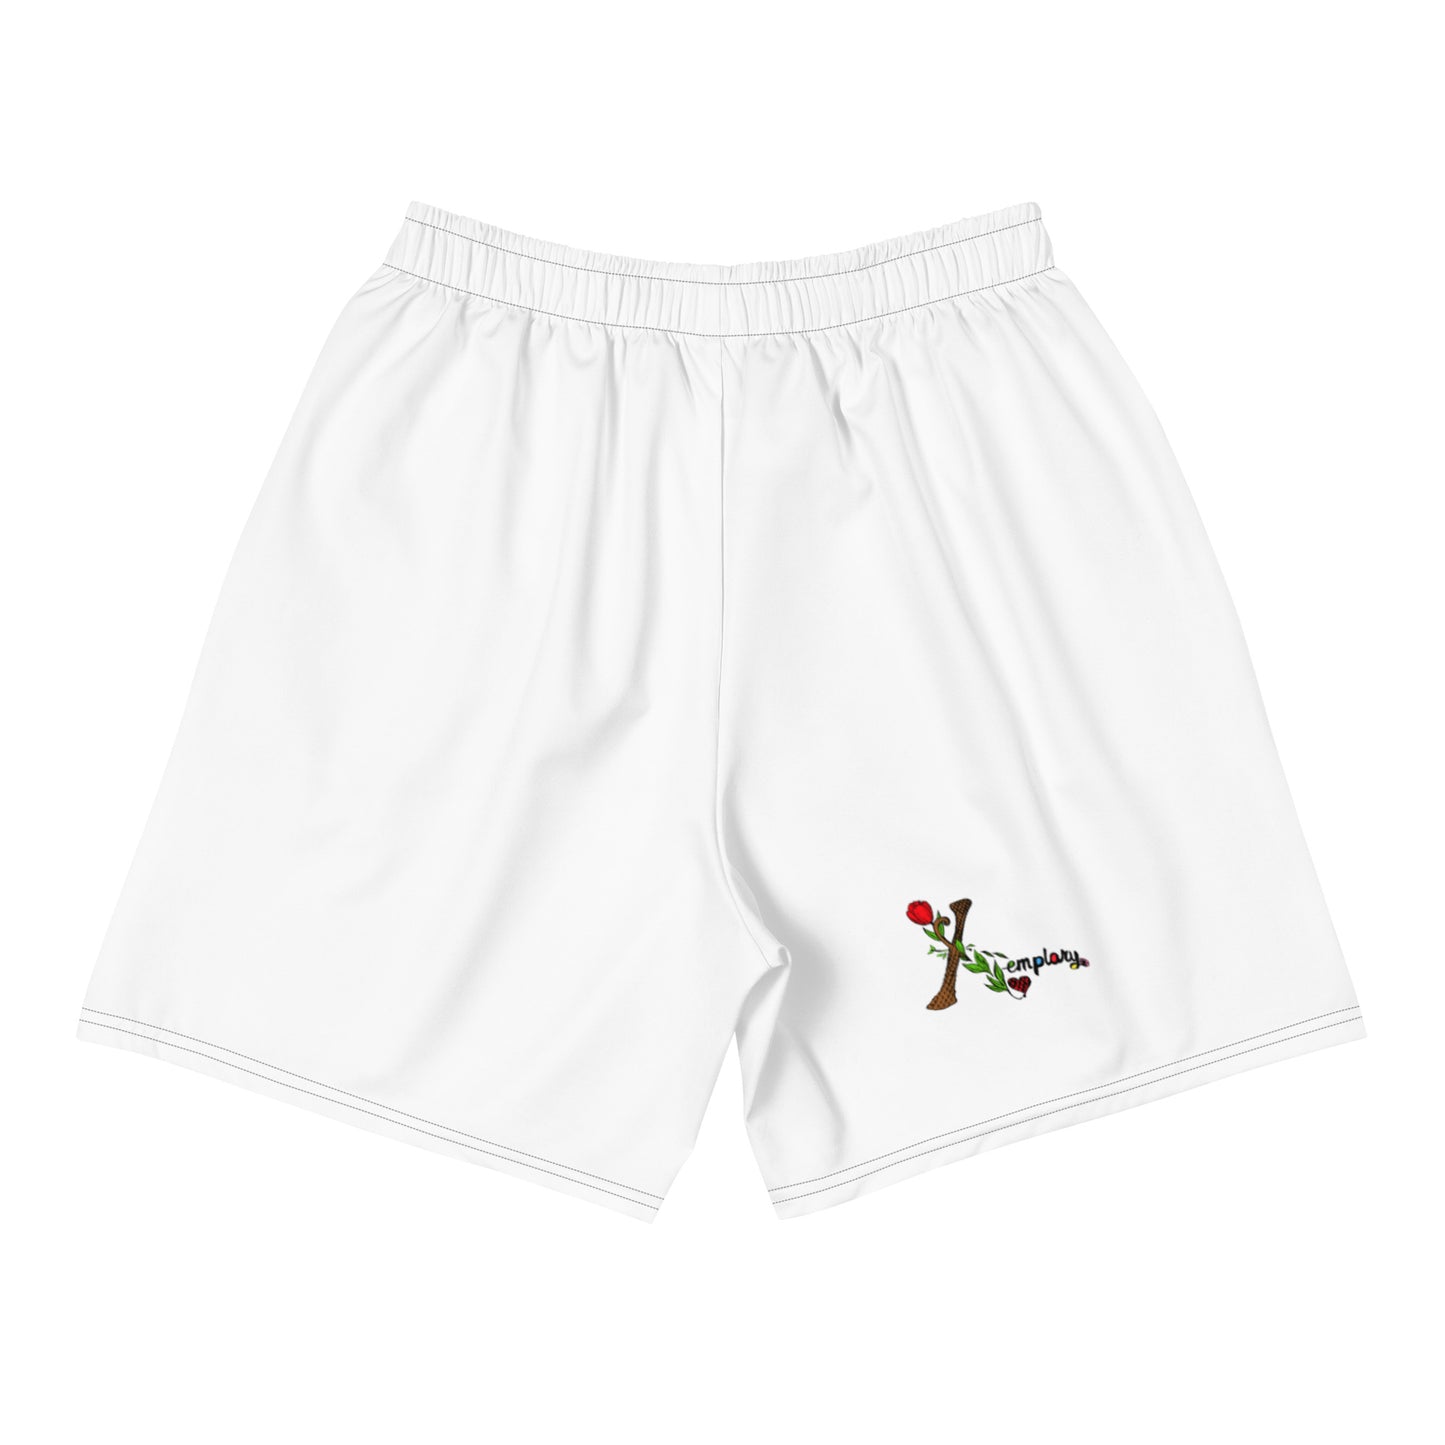 X-emplary Recycled White Athletic Shorts